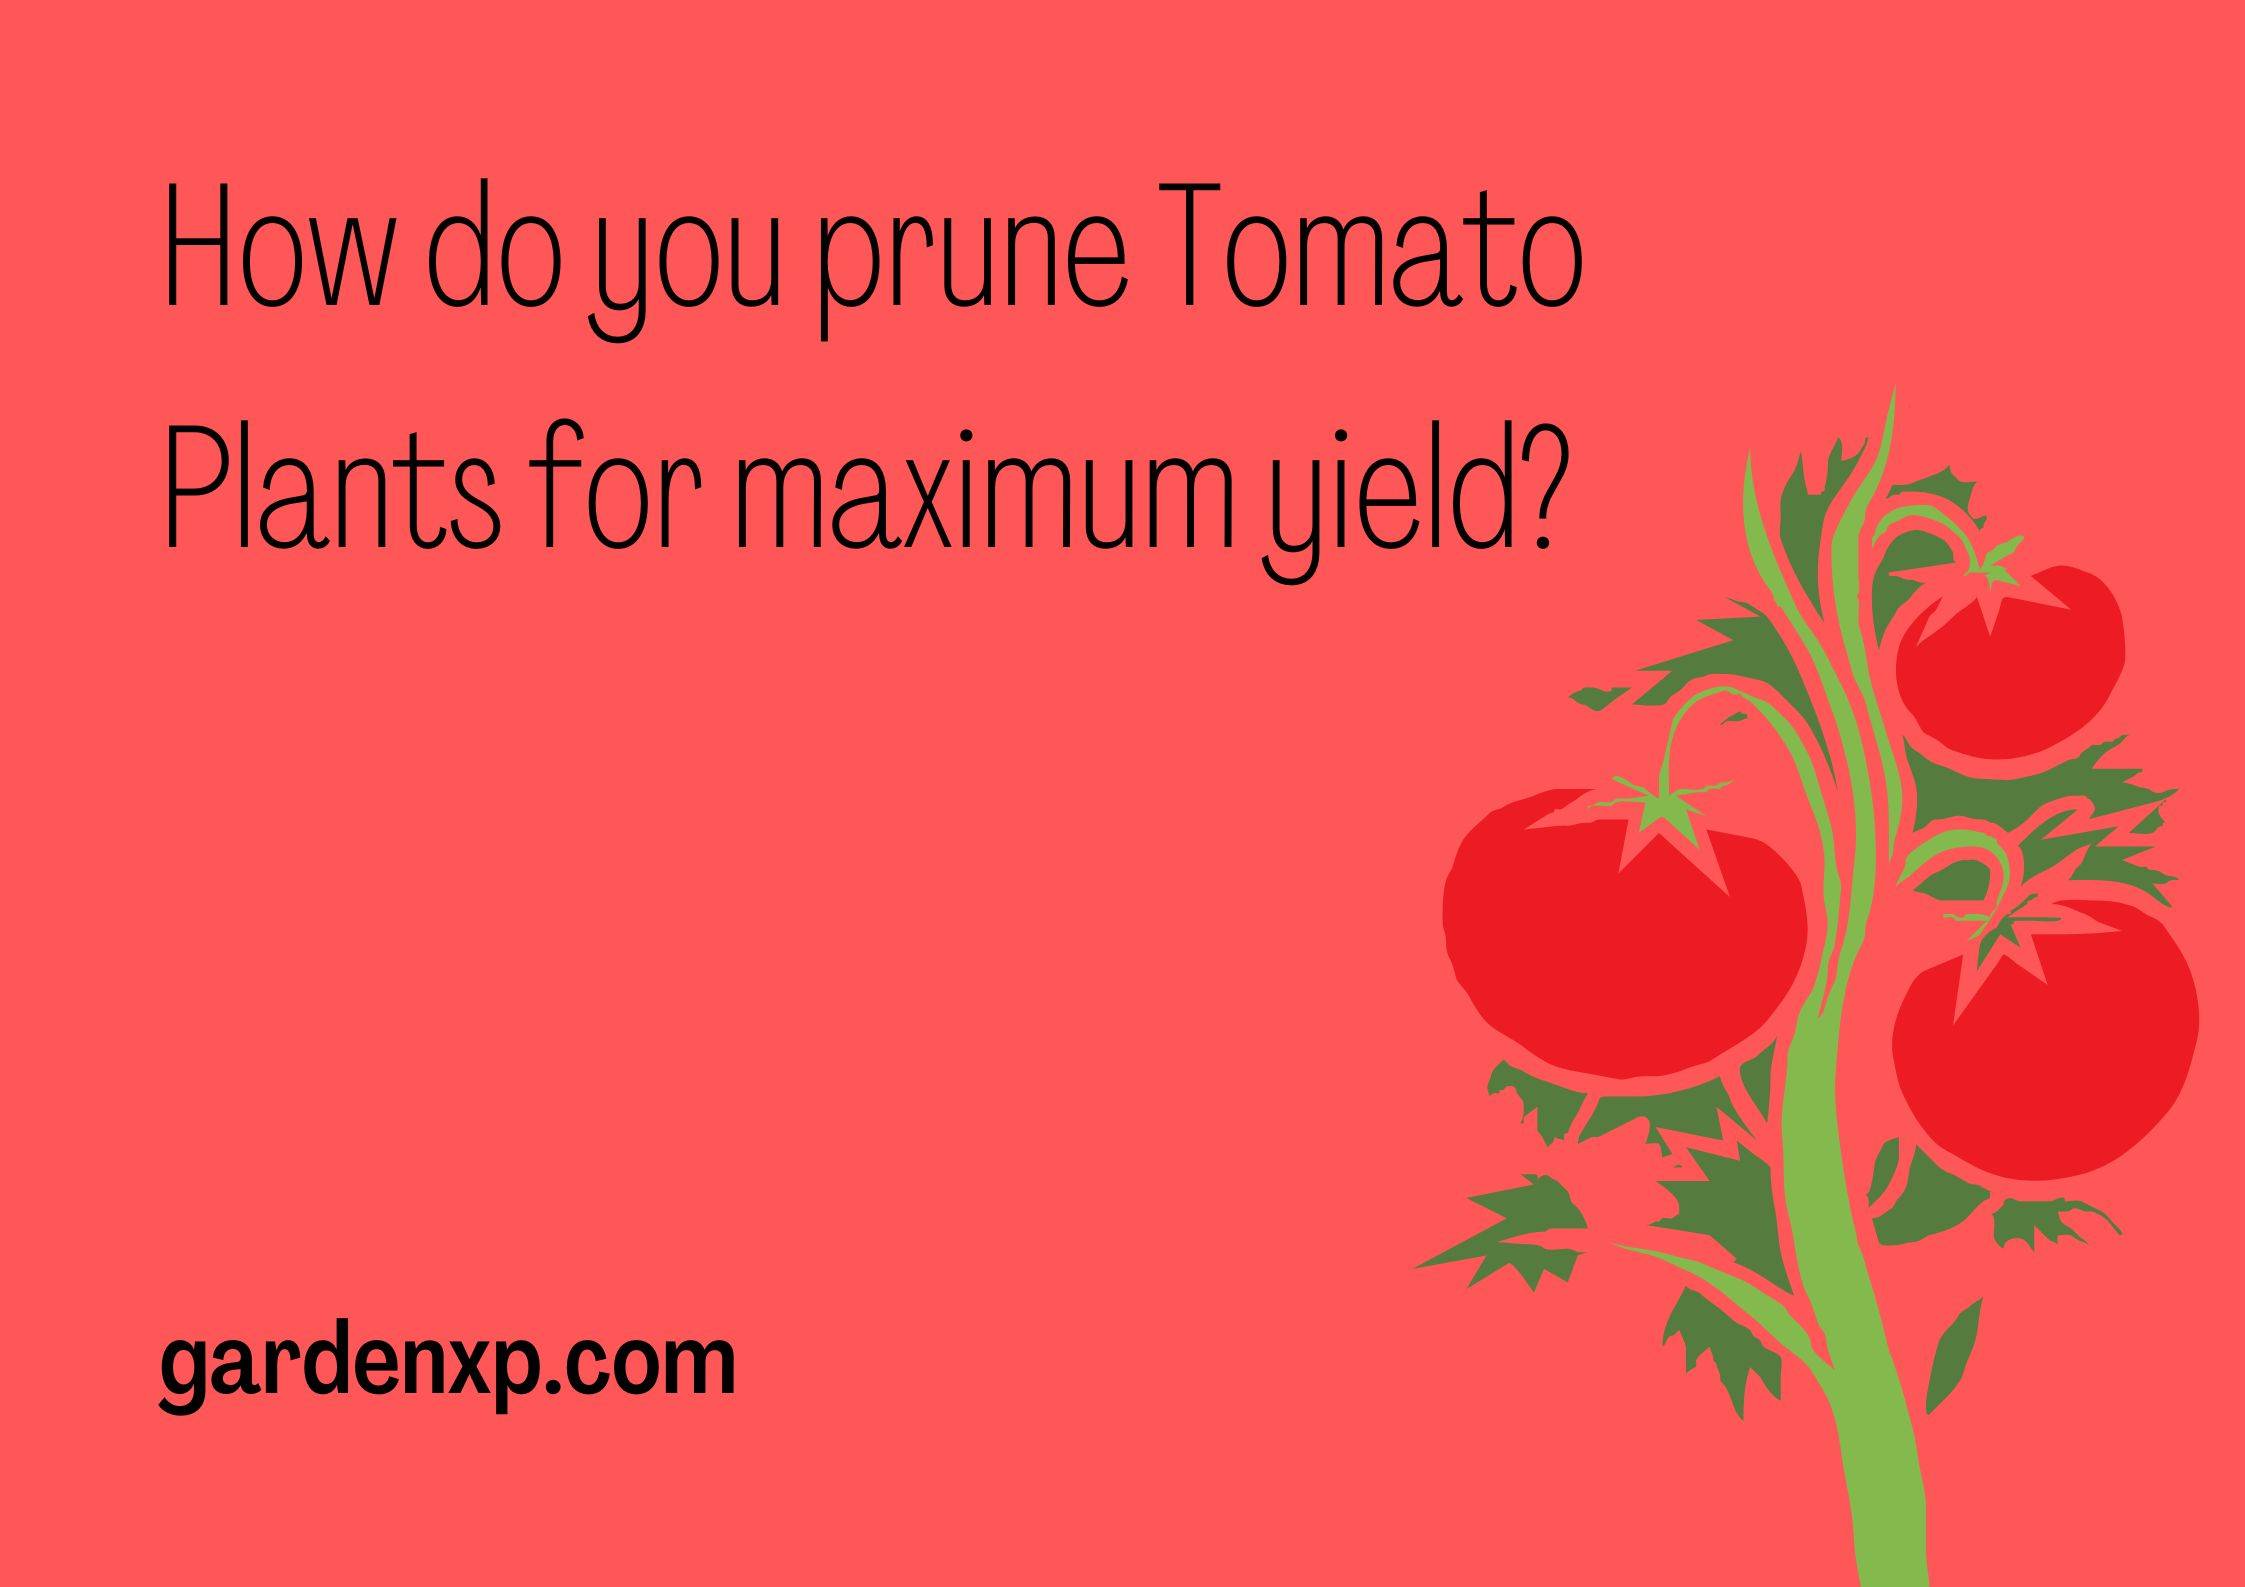 How do you prune Tomato Plants for maximum yield?